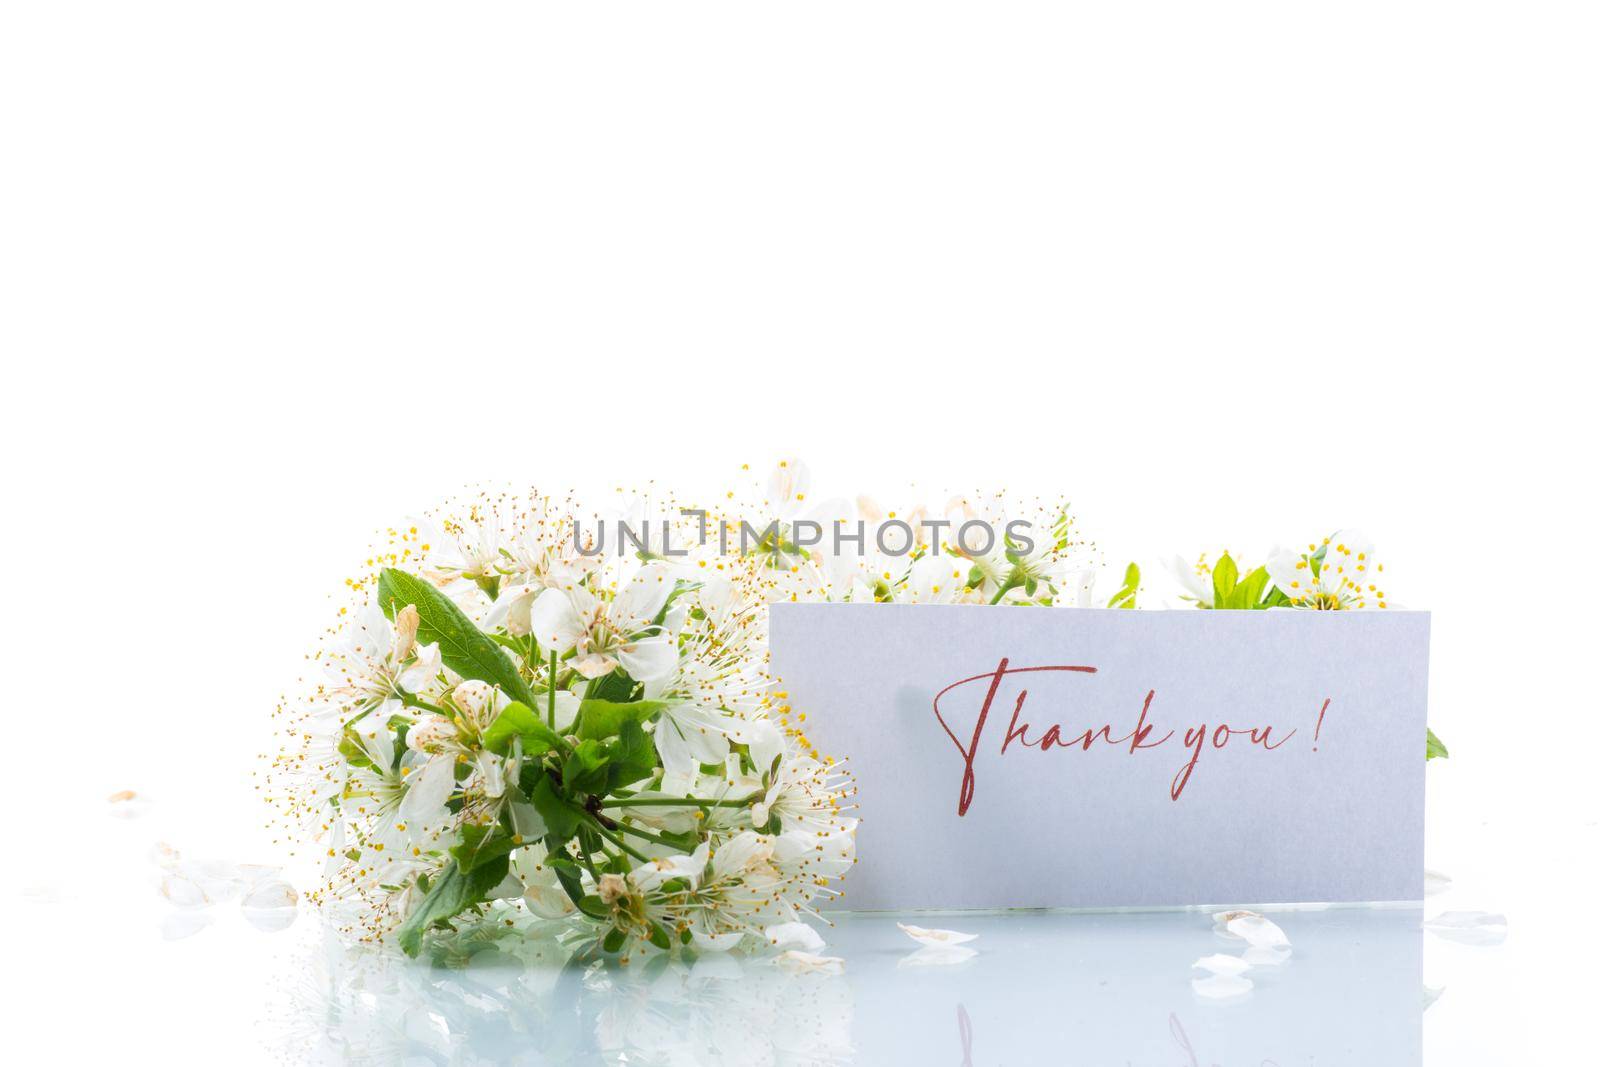 thank you card and blooming spring branch with flowers isolated on white background